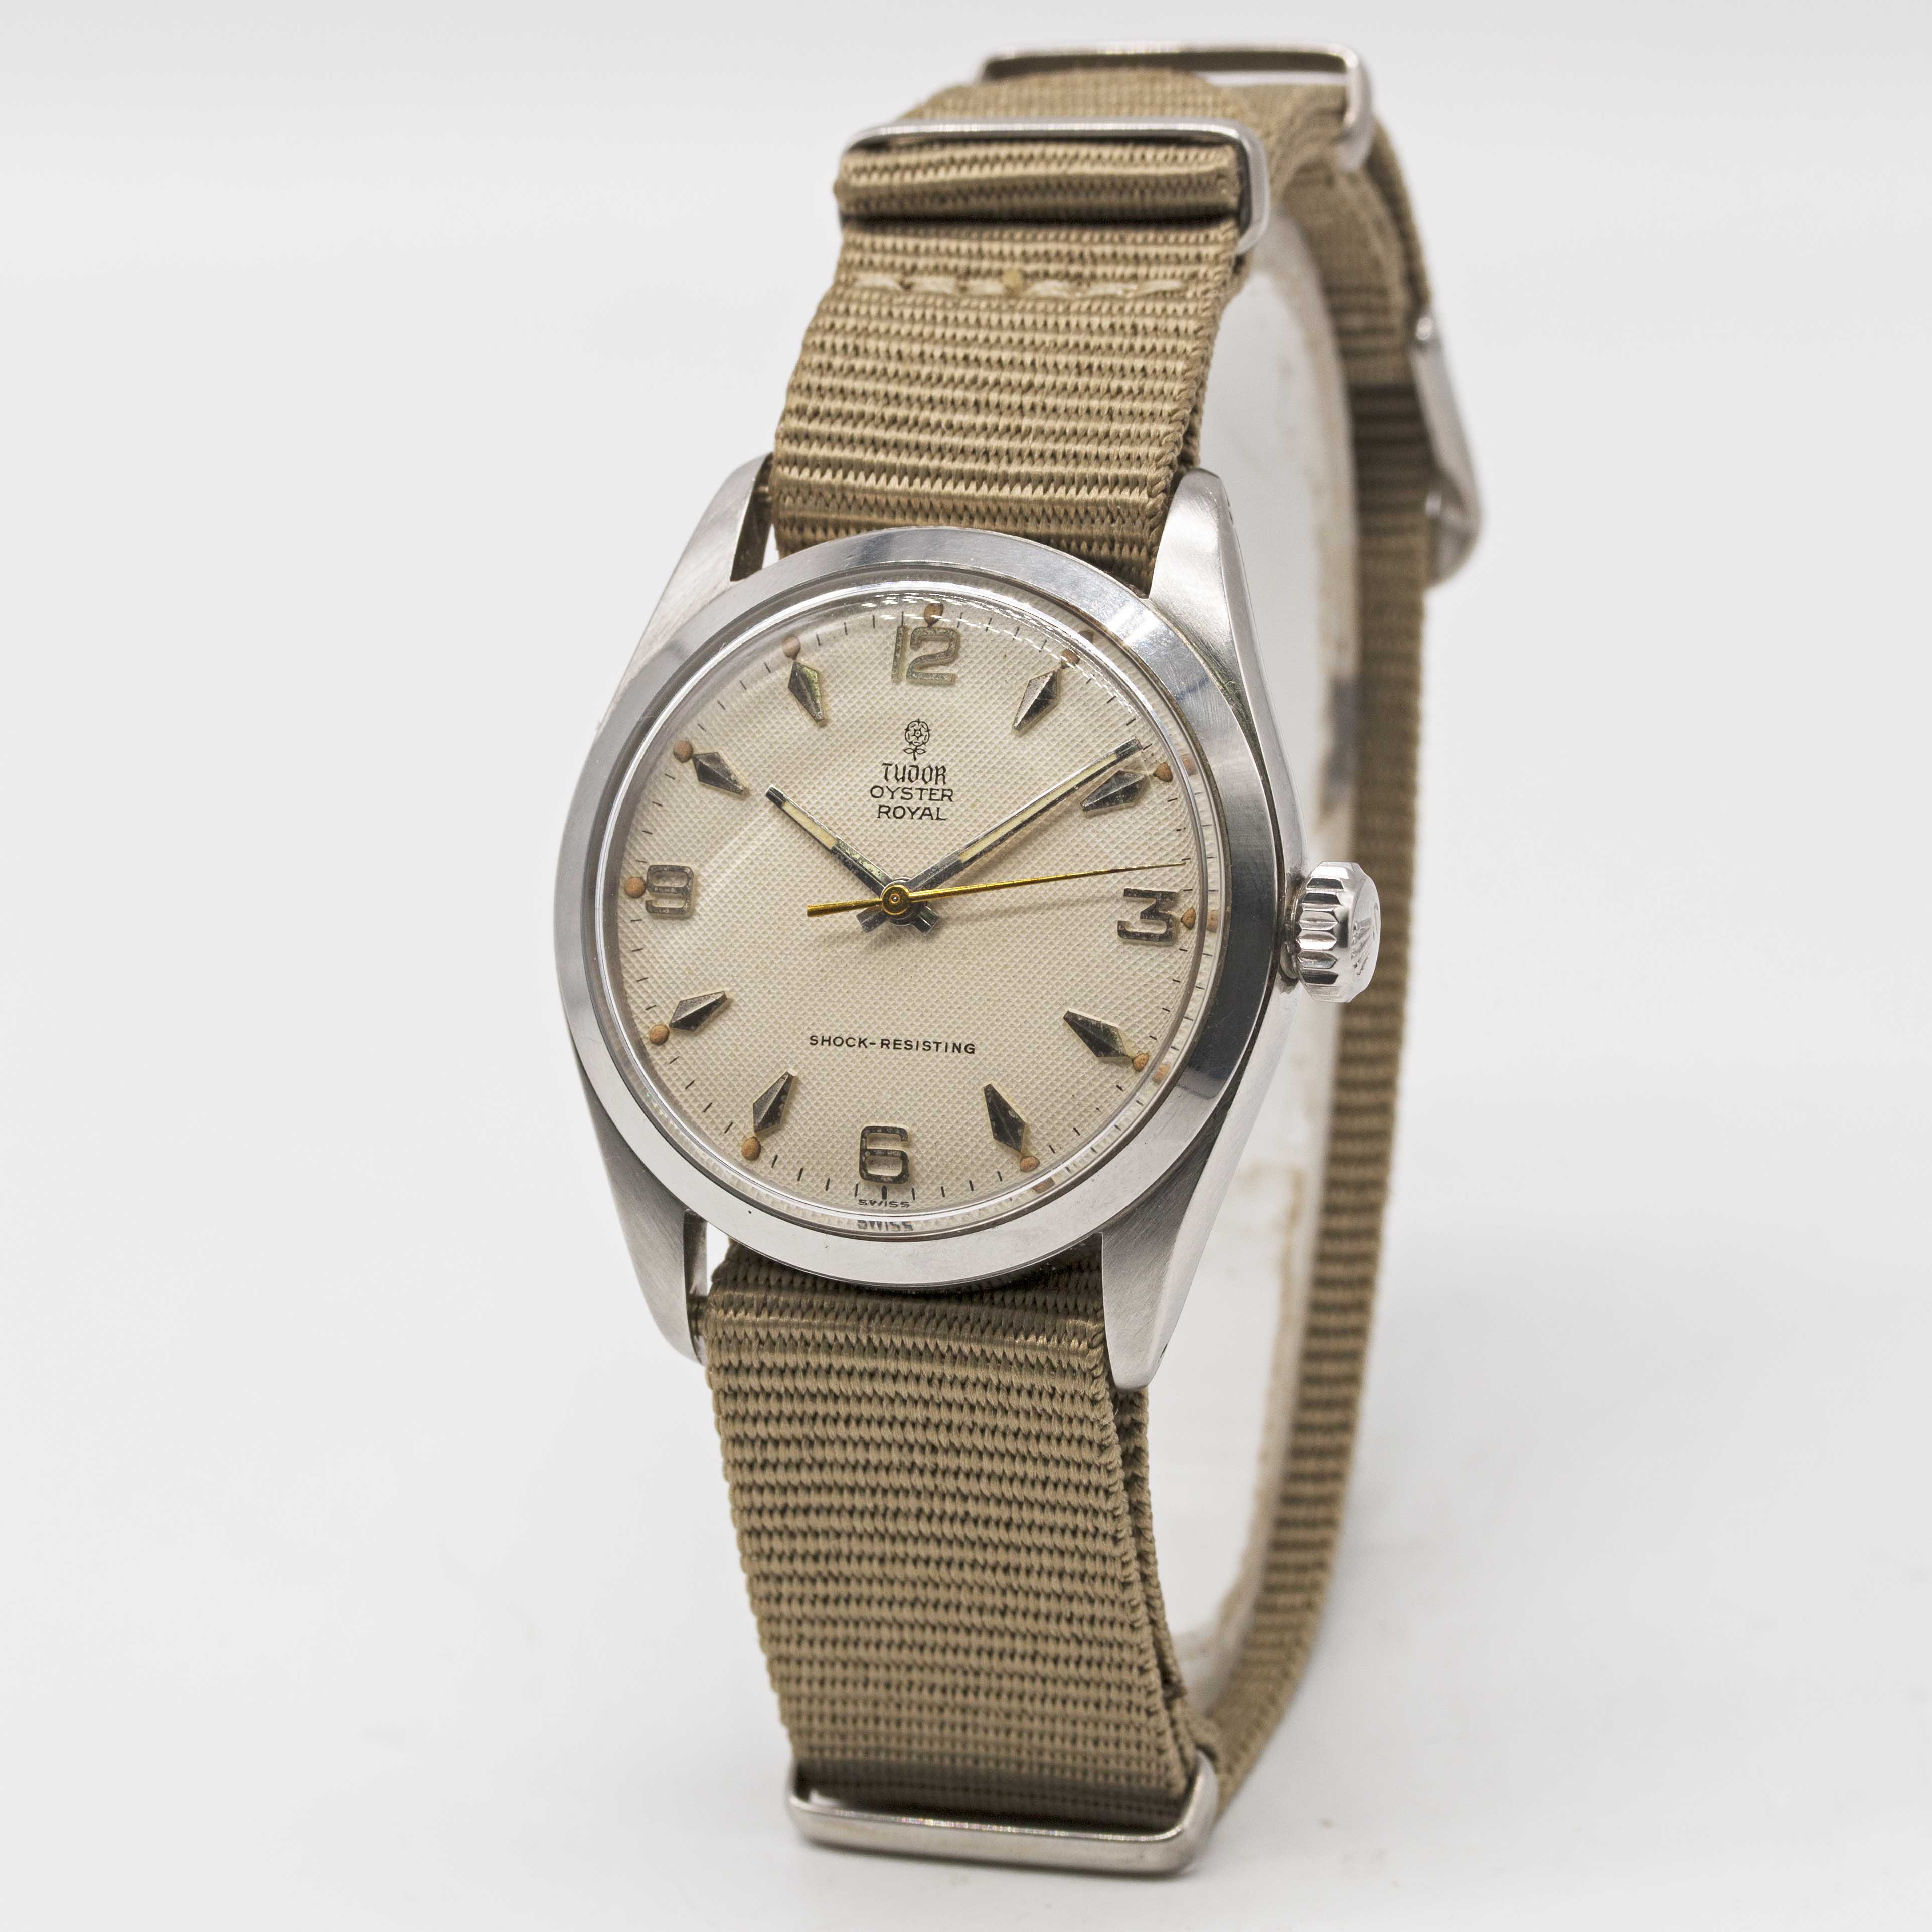 A GENTLEMAN'S STAINLESS STEEL ROLEX TUDOR OYSTER ROYAL WRIST WATCH CIRCA 1958, REF. 7934 WITH - Image 2 of 4